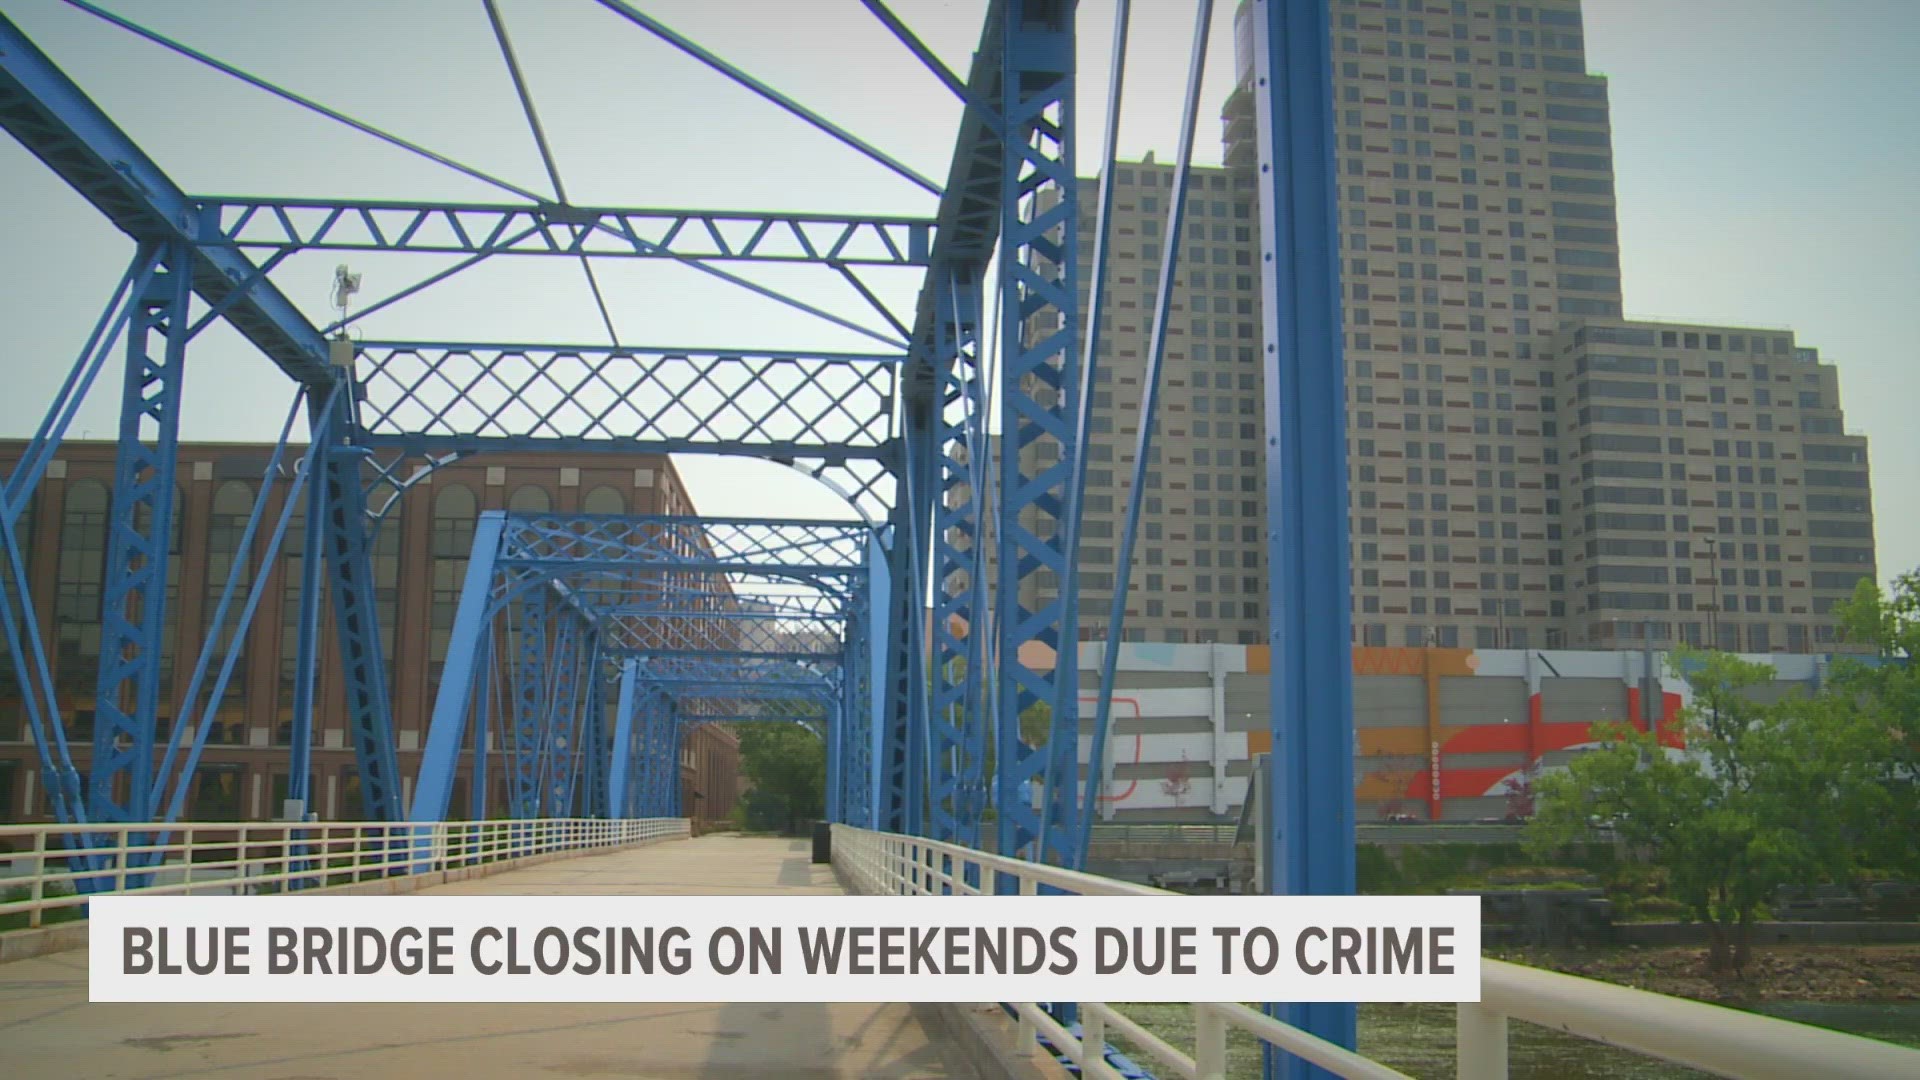 The decision came after shots were fired among a crowd on the Blue Bridge over the weekend. Officials are hoping to discourage large crowds from gathering.